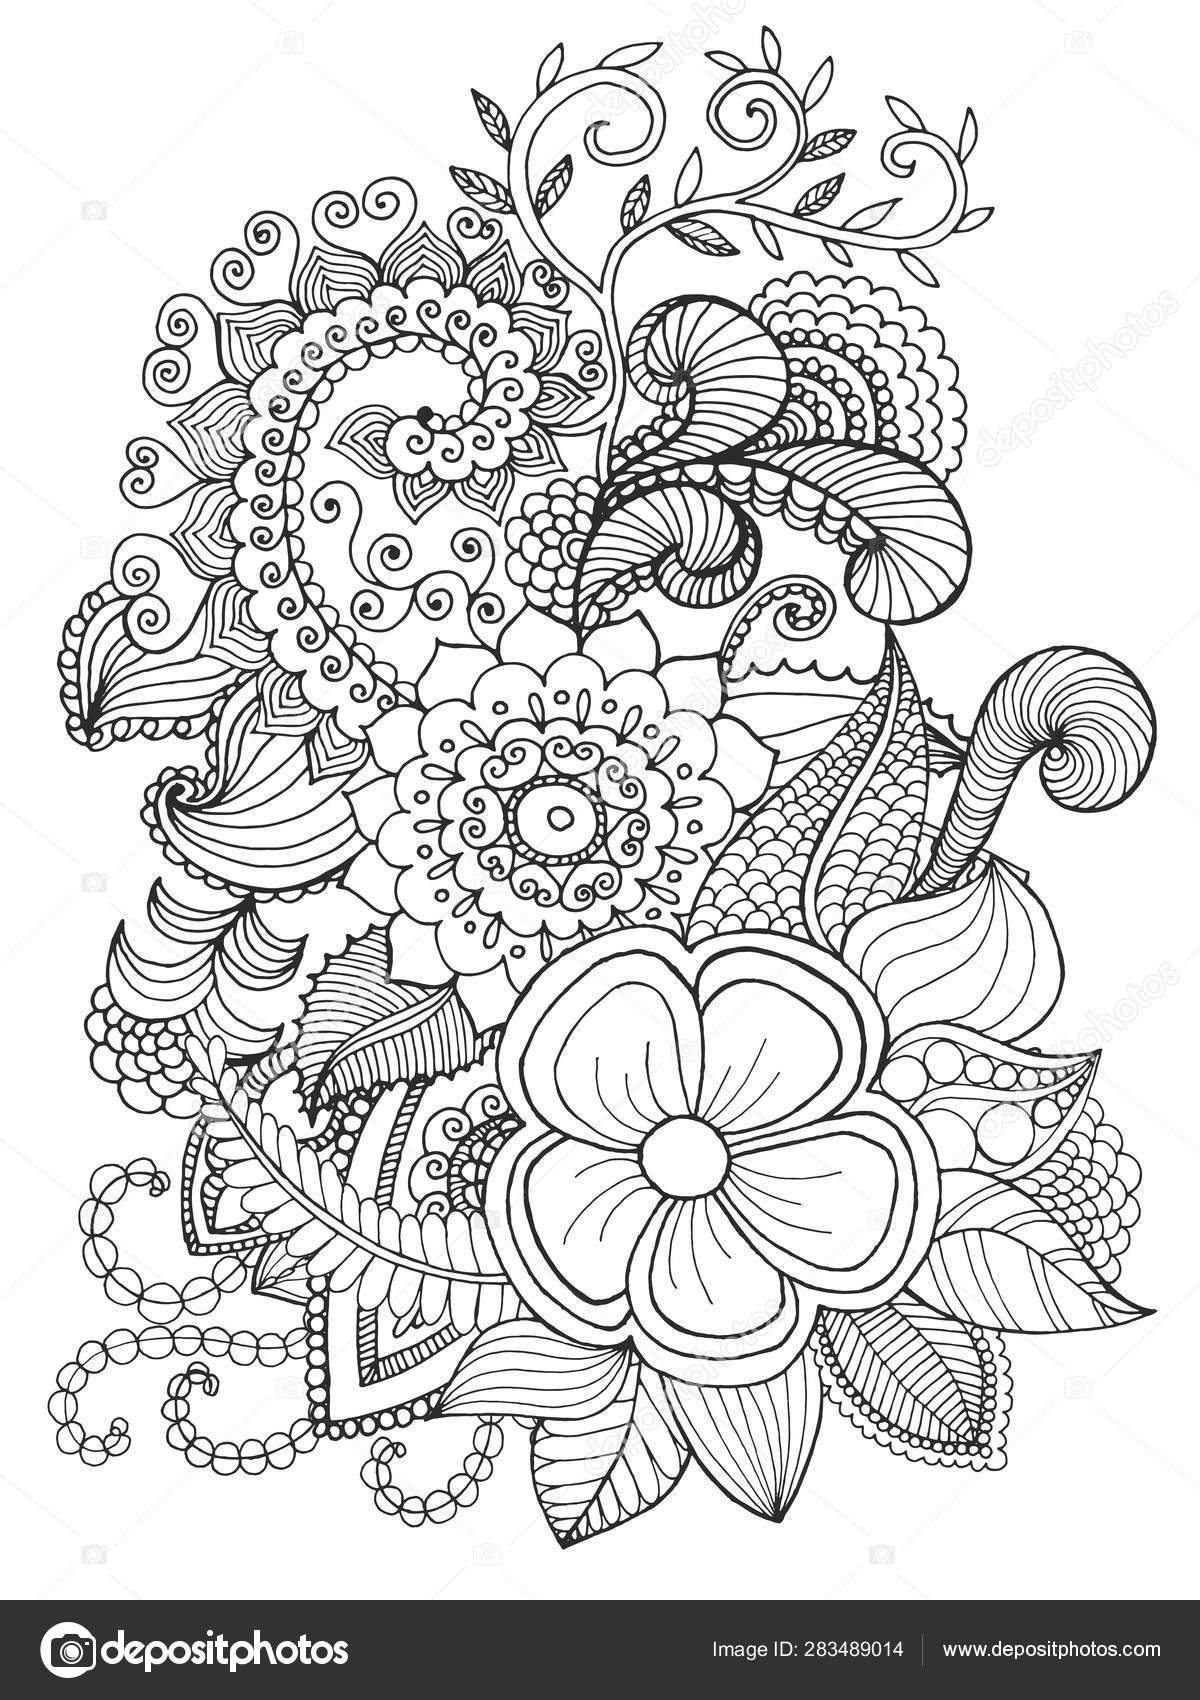 Colouring Page With Flowers Stock Illustration - Download Image